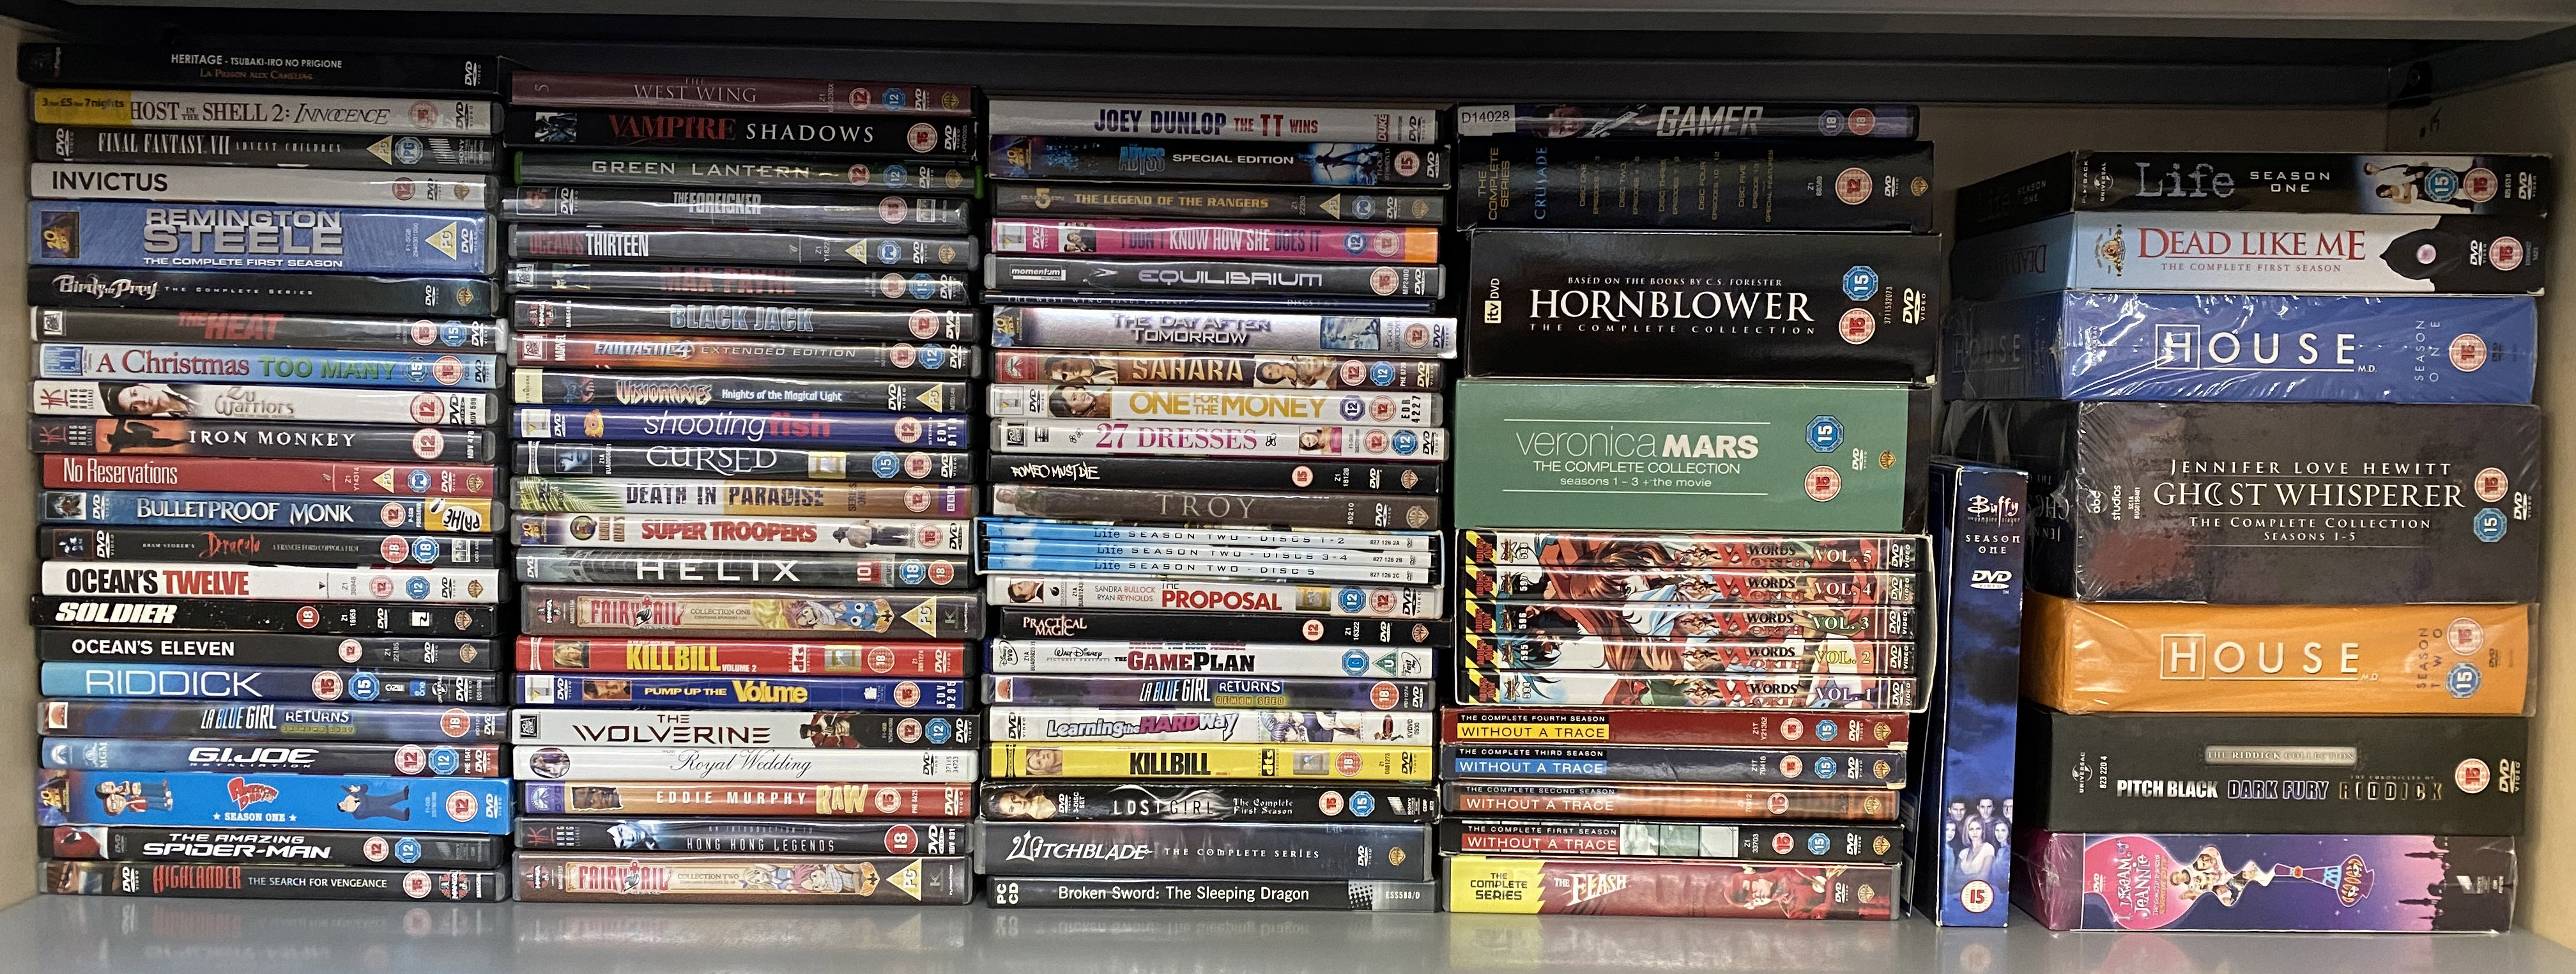 A massive quantity of over 700 DVDs and Blu-Rays including box sets.